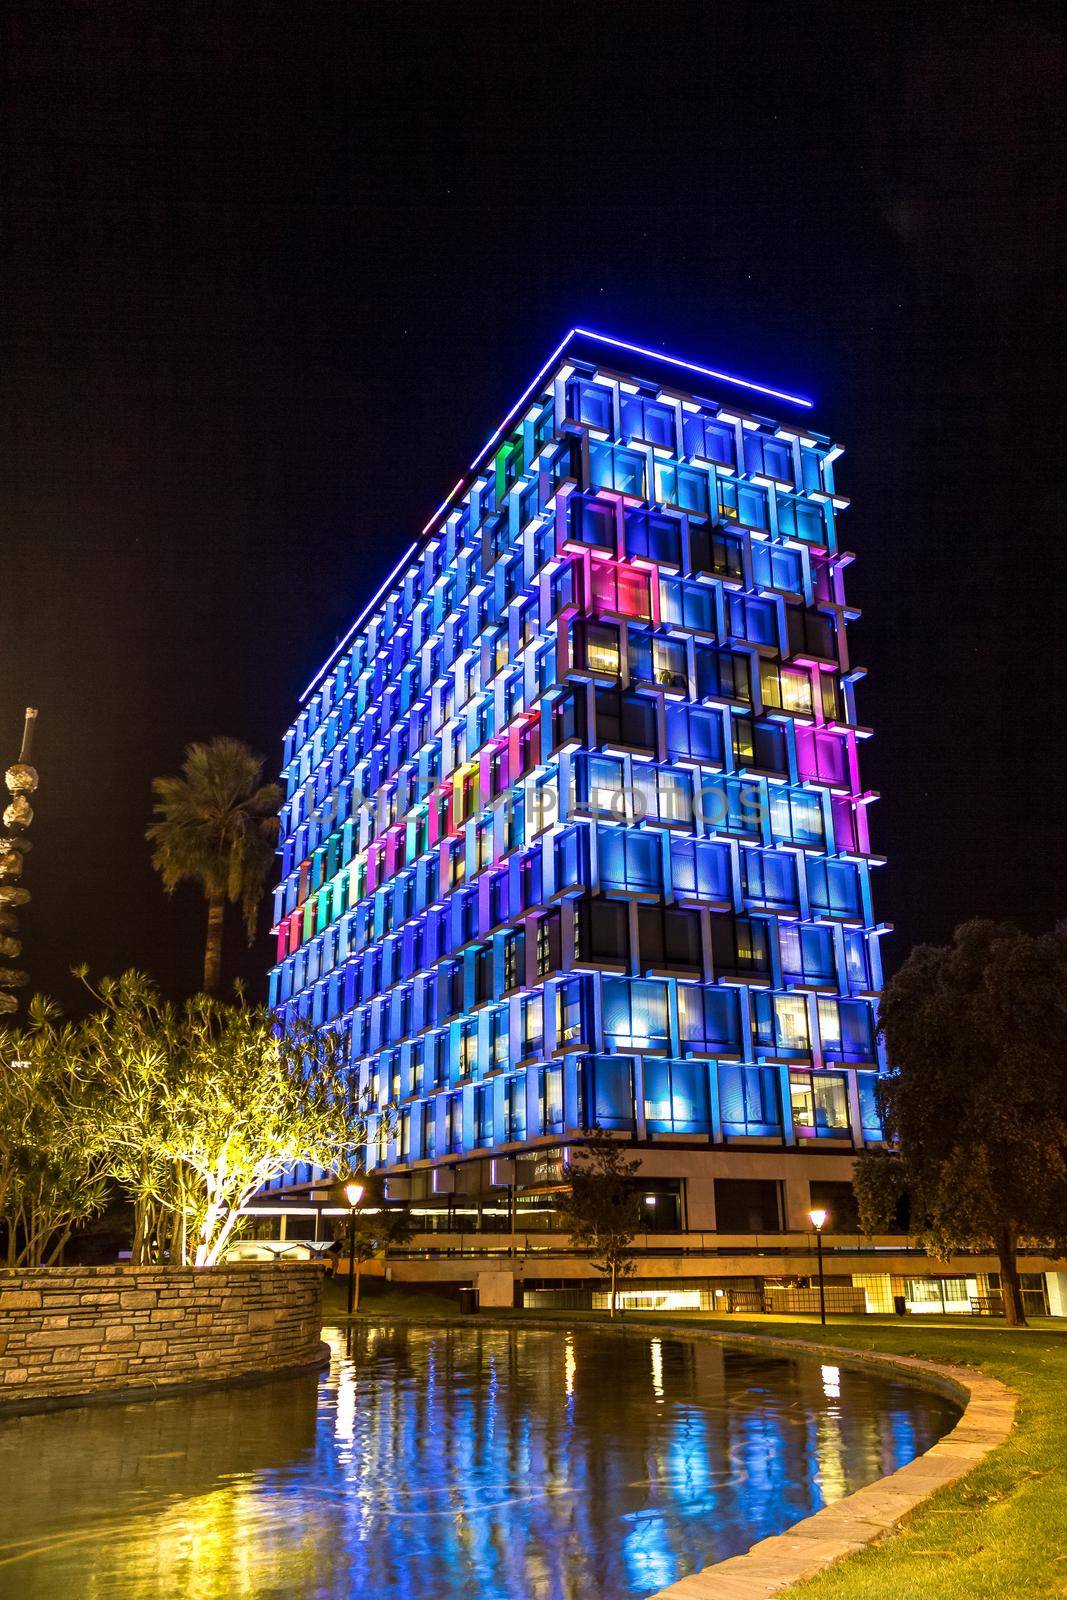 Perth, Aaustralia - March 19 : Colorful lighting on building for show people in night time at Hay street mall by bettercallcurry